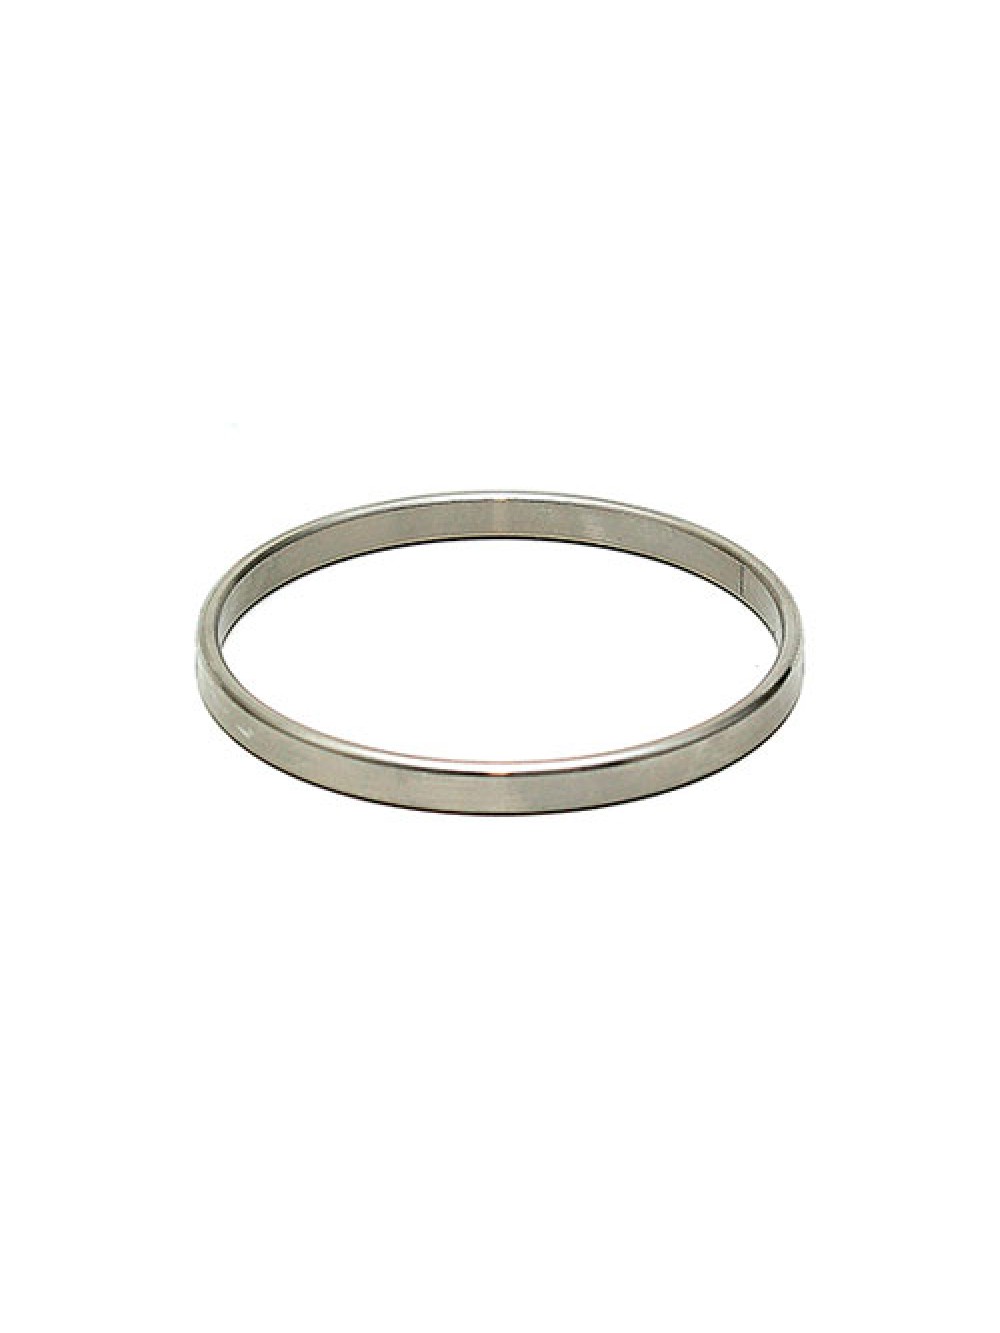 Thin Metal 0.4cm Wide Cock Ring 8718924227244